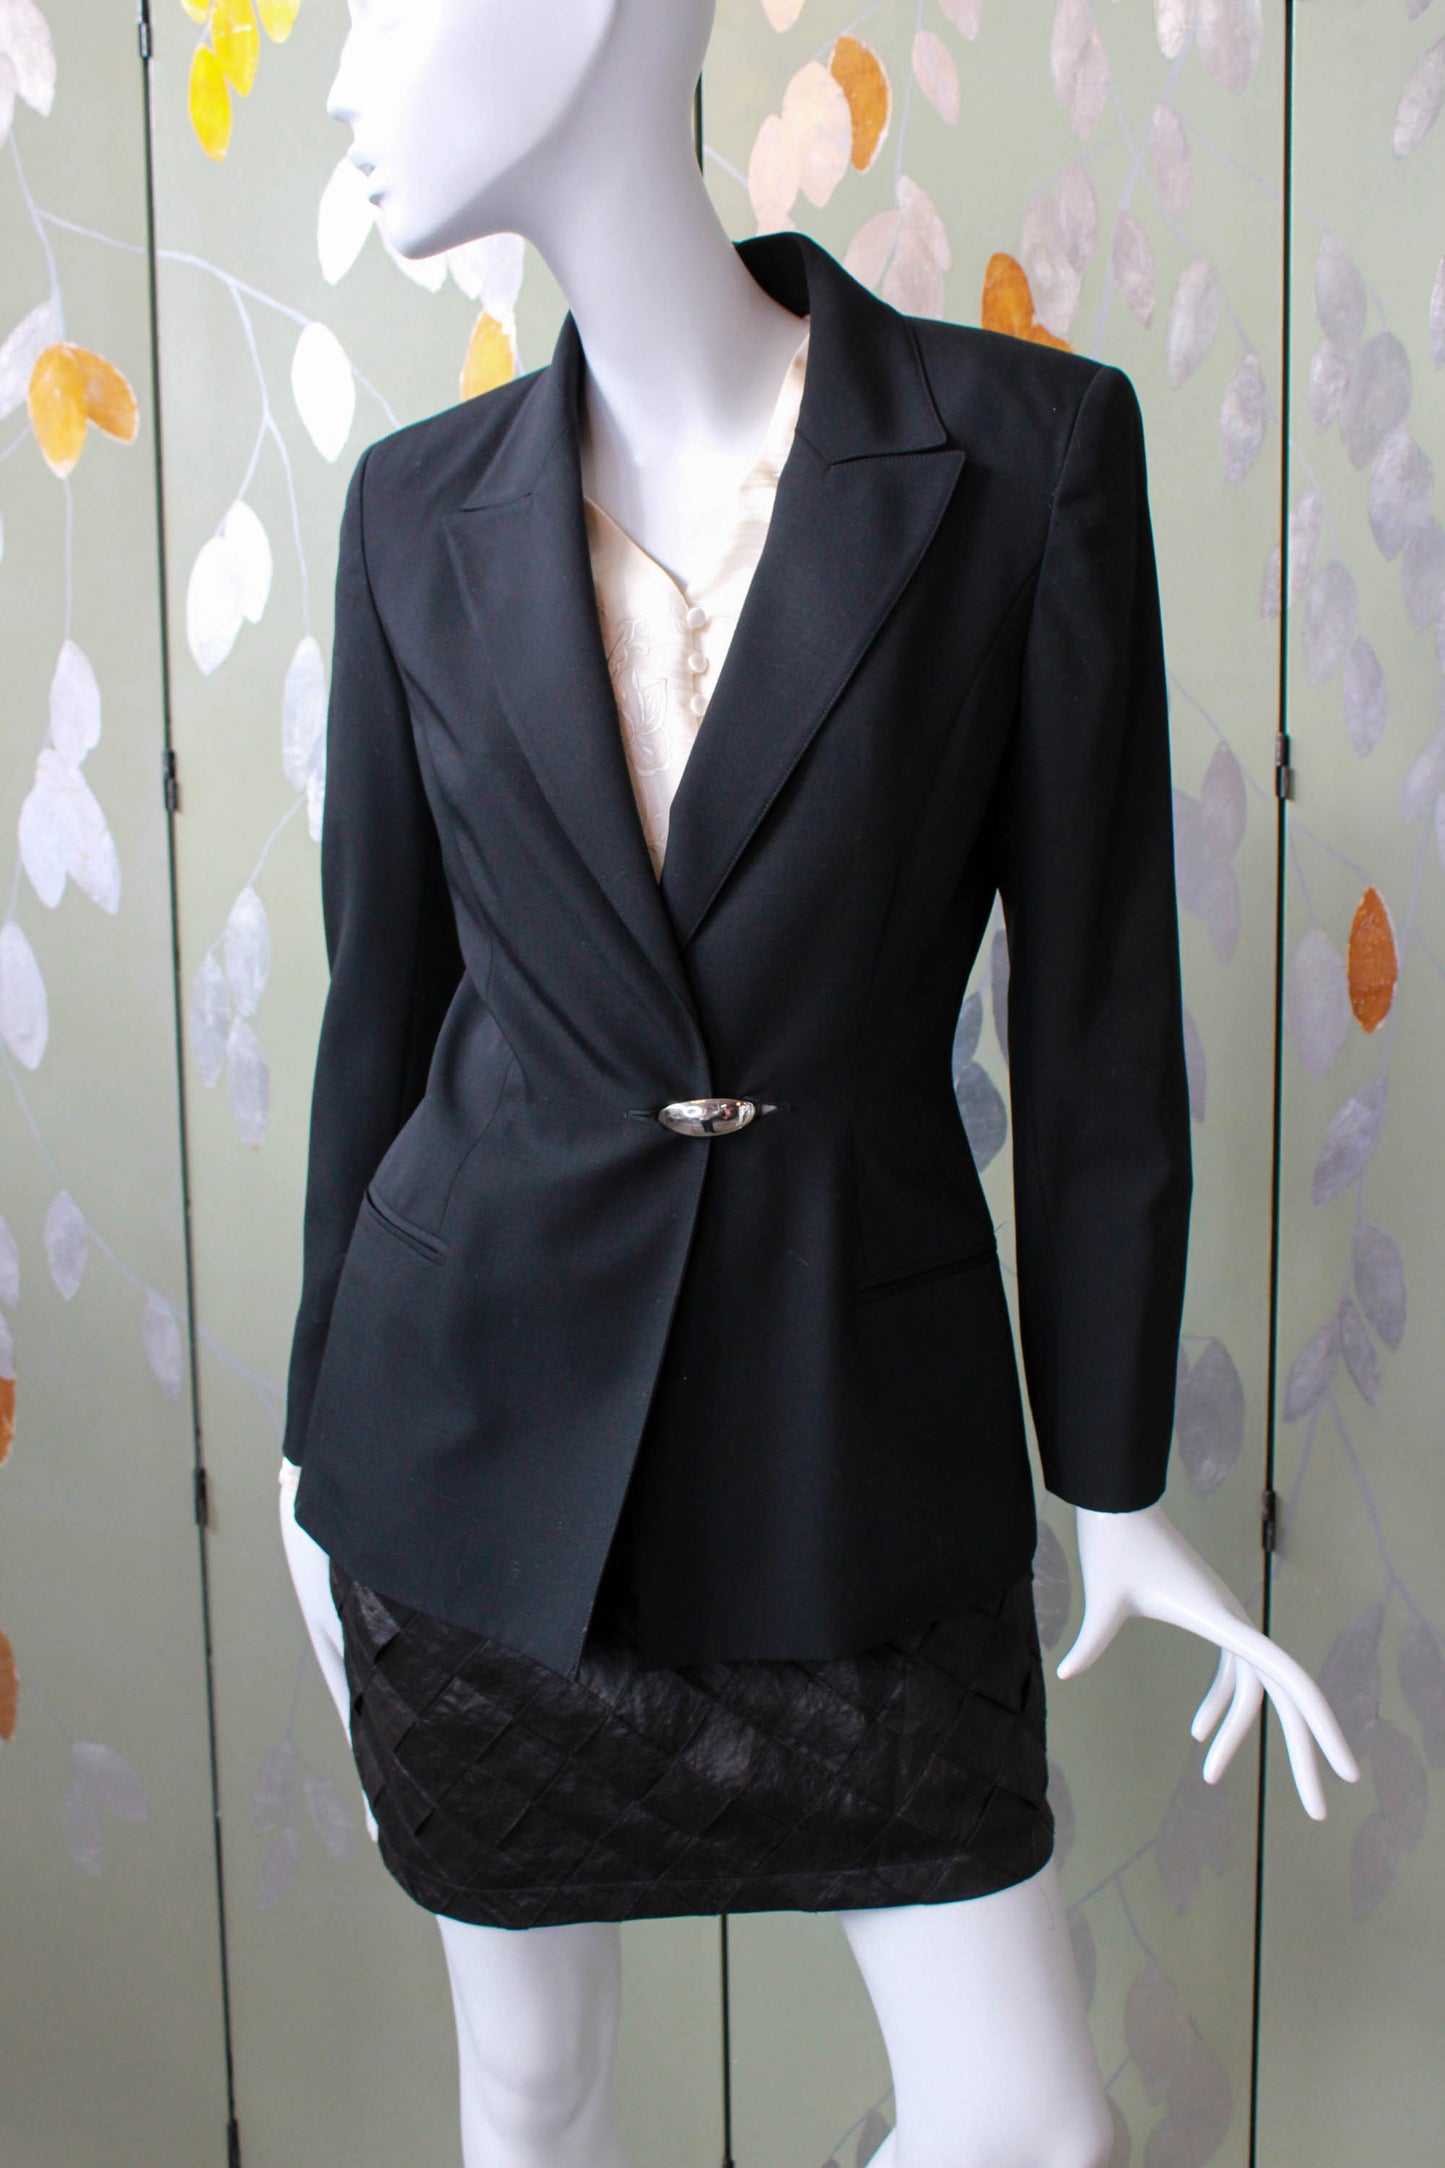 90s claude montana blazer with a silver clasp at the waist, sharp notched collar vintage designer claude montana jacket black